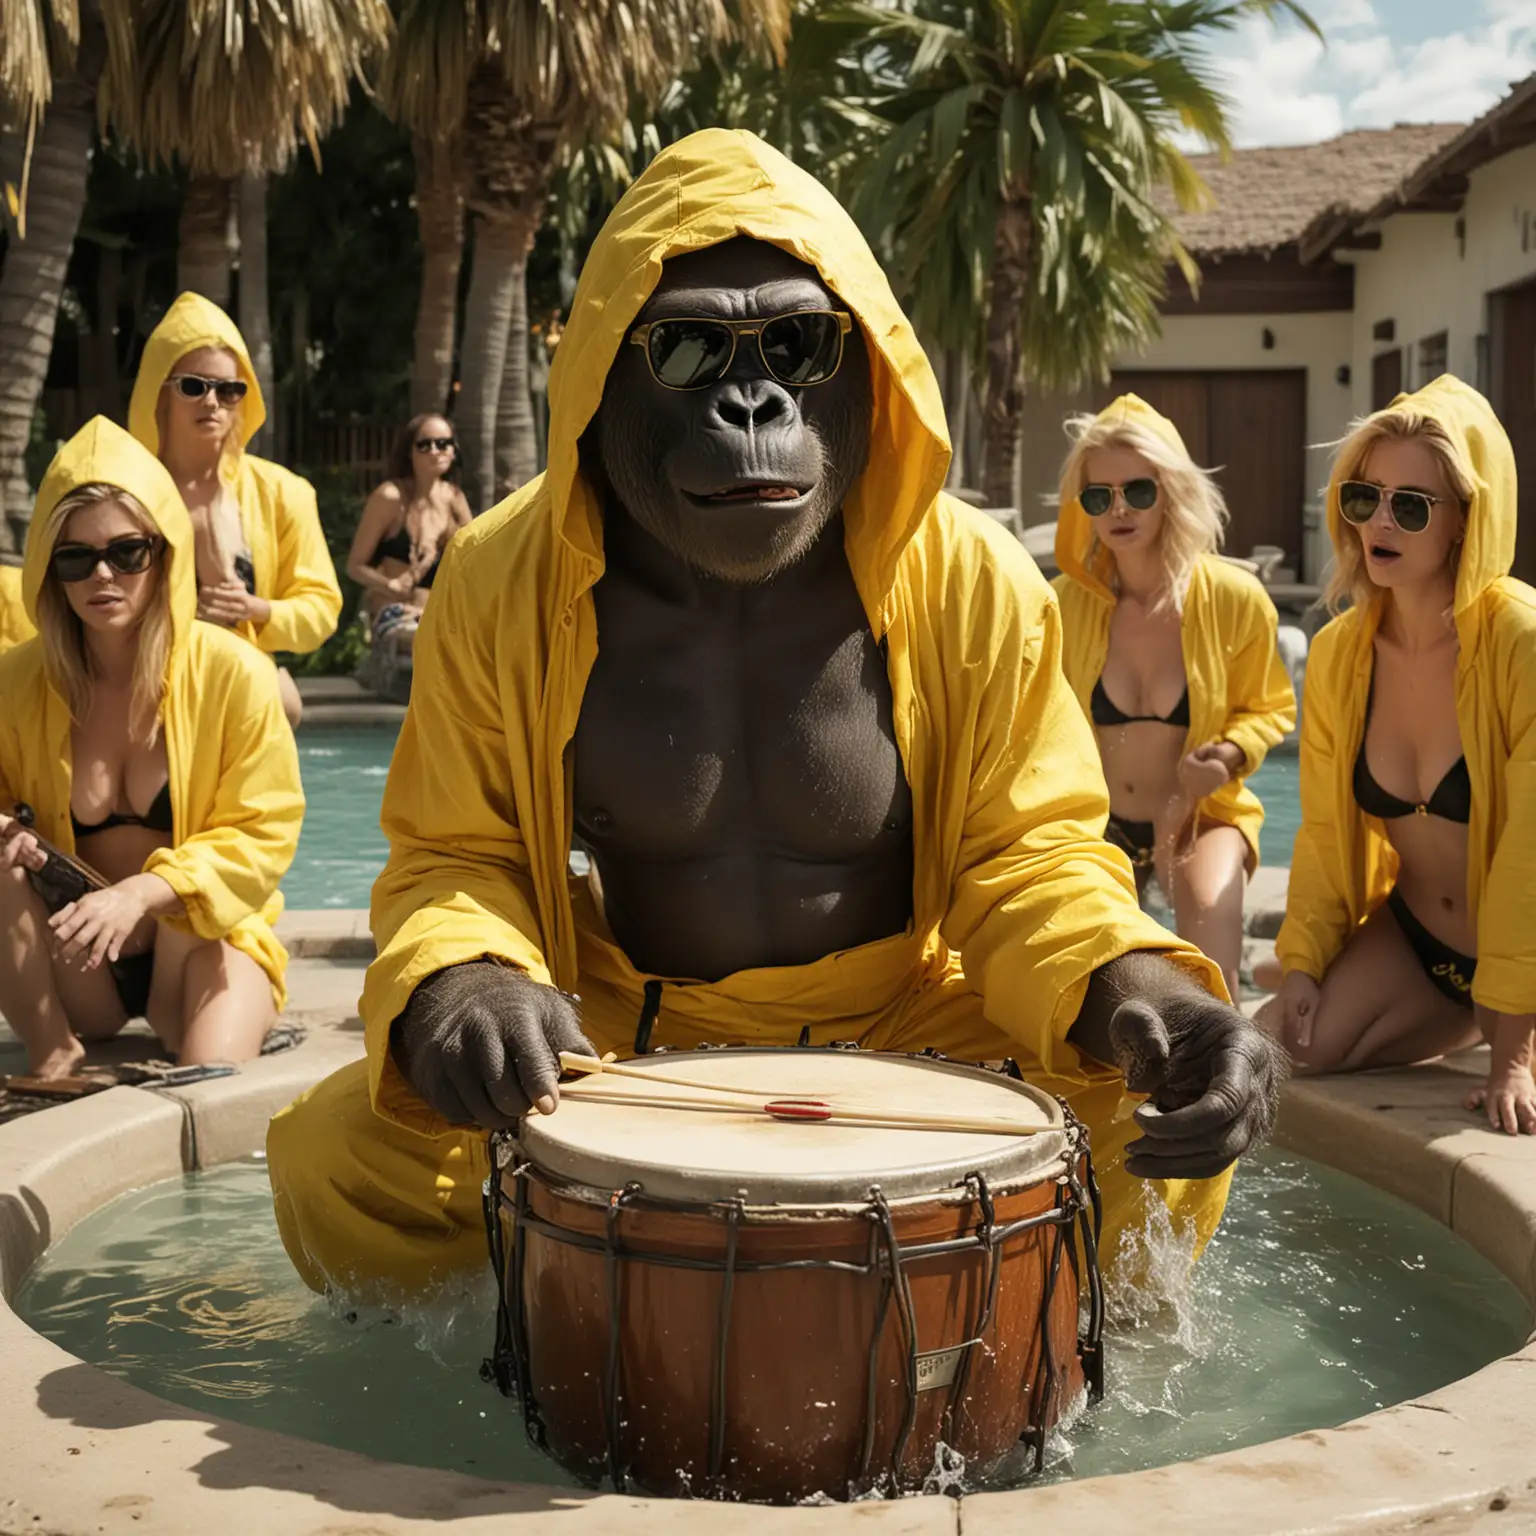 The gorilla is inside a huge jacuzzi surrounded by sexy blonde women in bikini. he is playing african percusion. The gorilla wears dark sunglasses and a YELLOW COLOR jumpsuit like the one in the Breaking Bad series. His head is covered by the yellow hood.
he is playing an african drum instrument. Close up. cinematic. FACING THE CAMERA. 